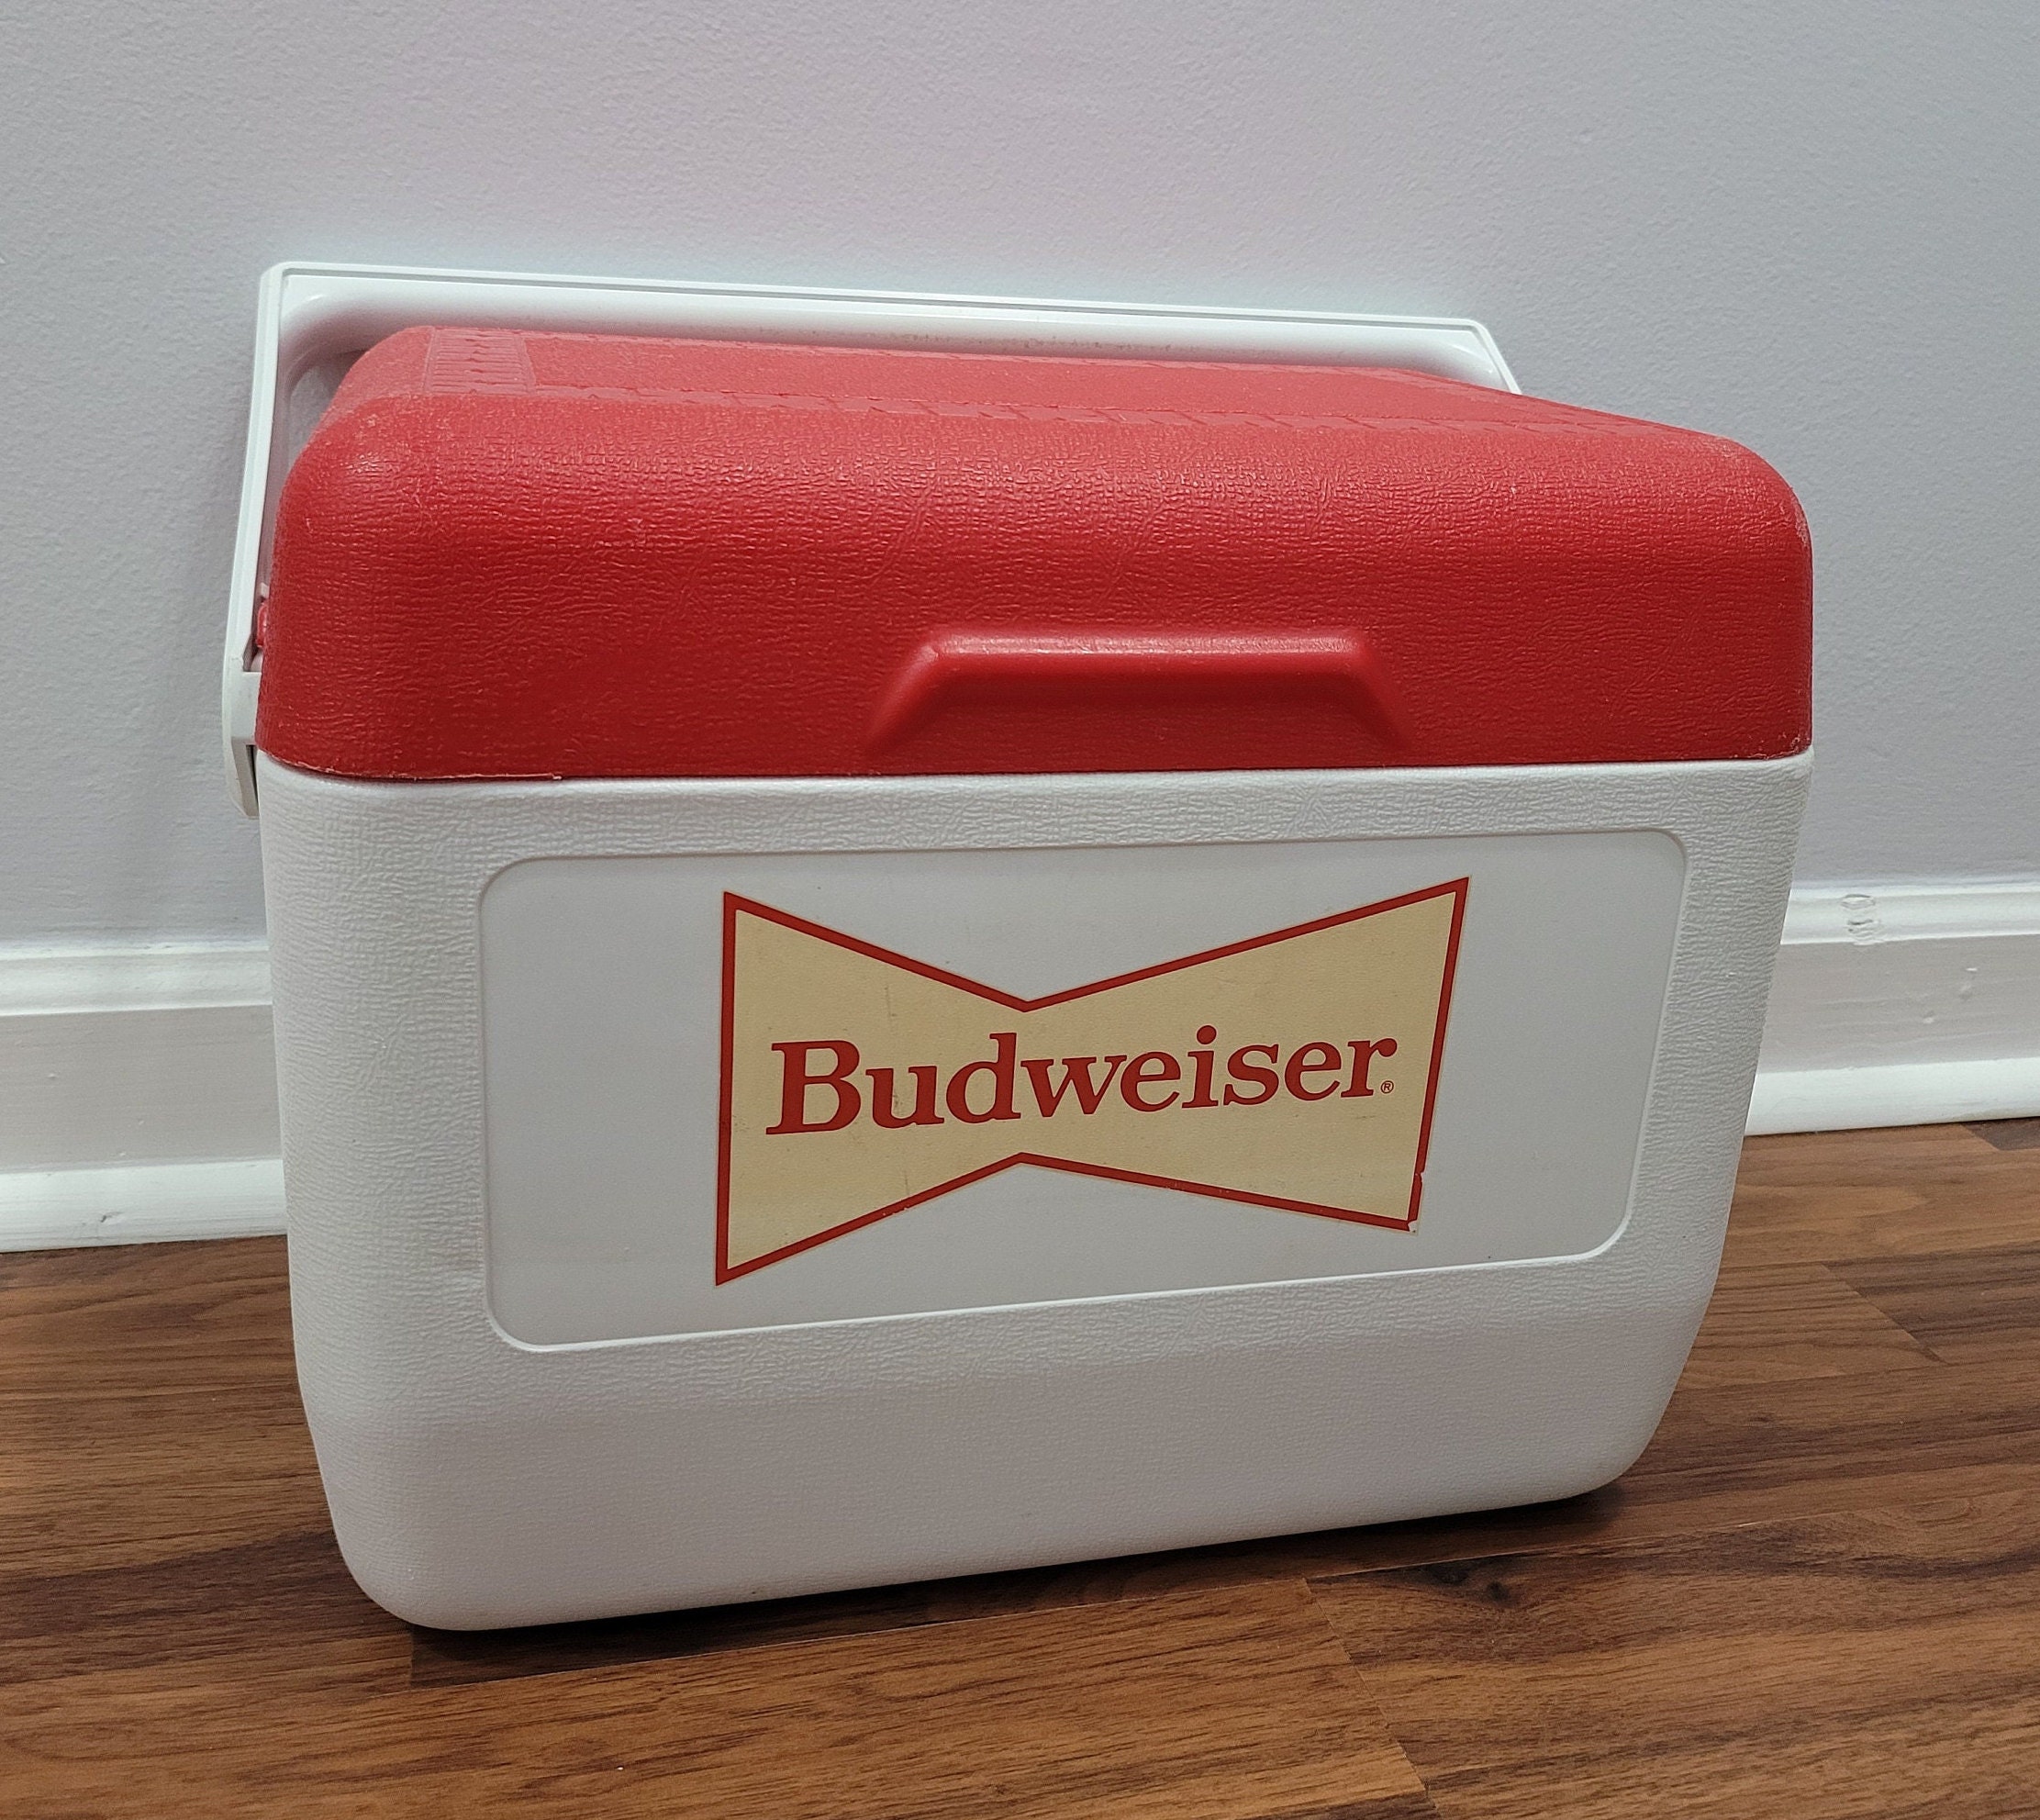 Buy Budweiser Bottle 330ml Case of 24 with Cooler Bag - Price, Offers,  Delivery | Clink PH